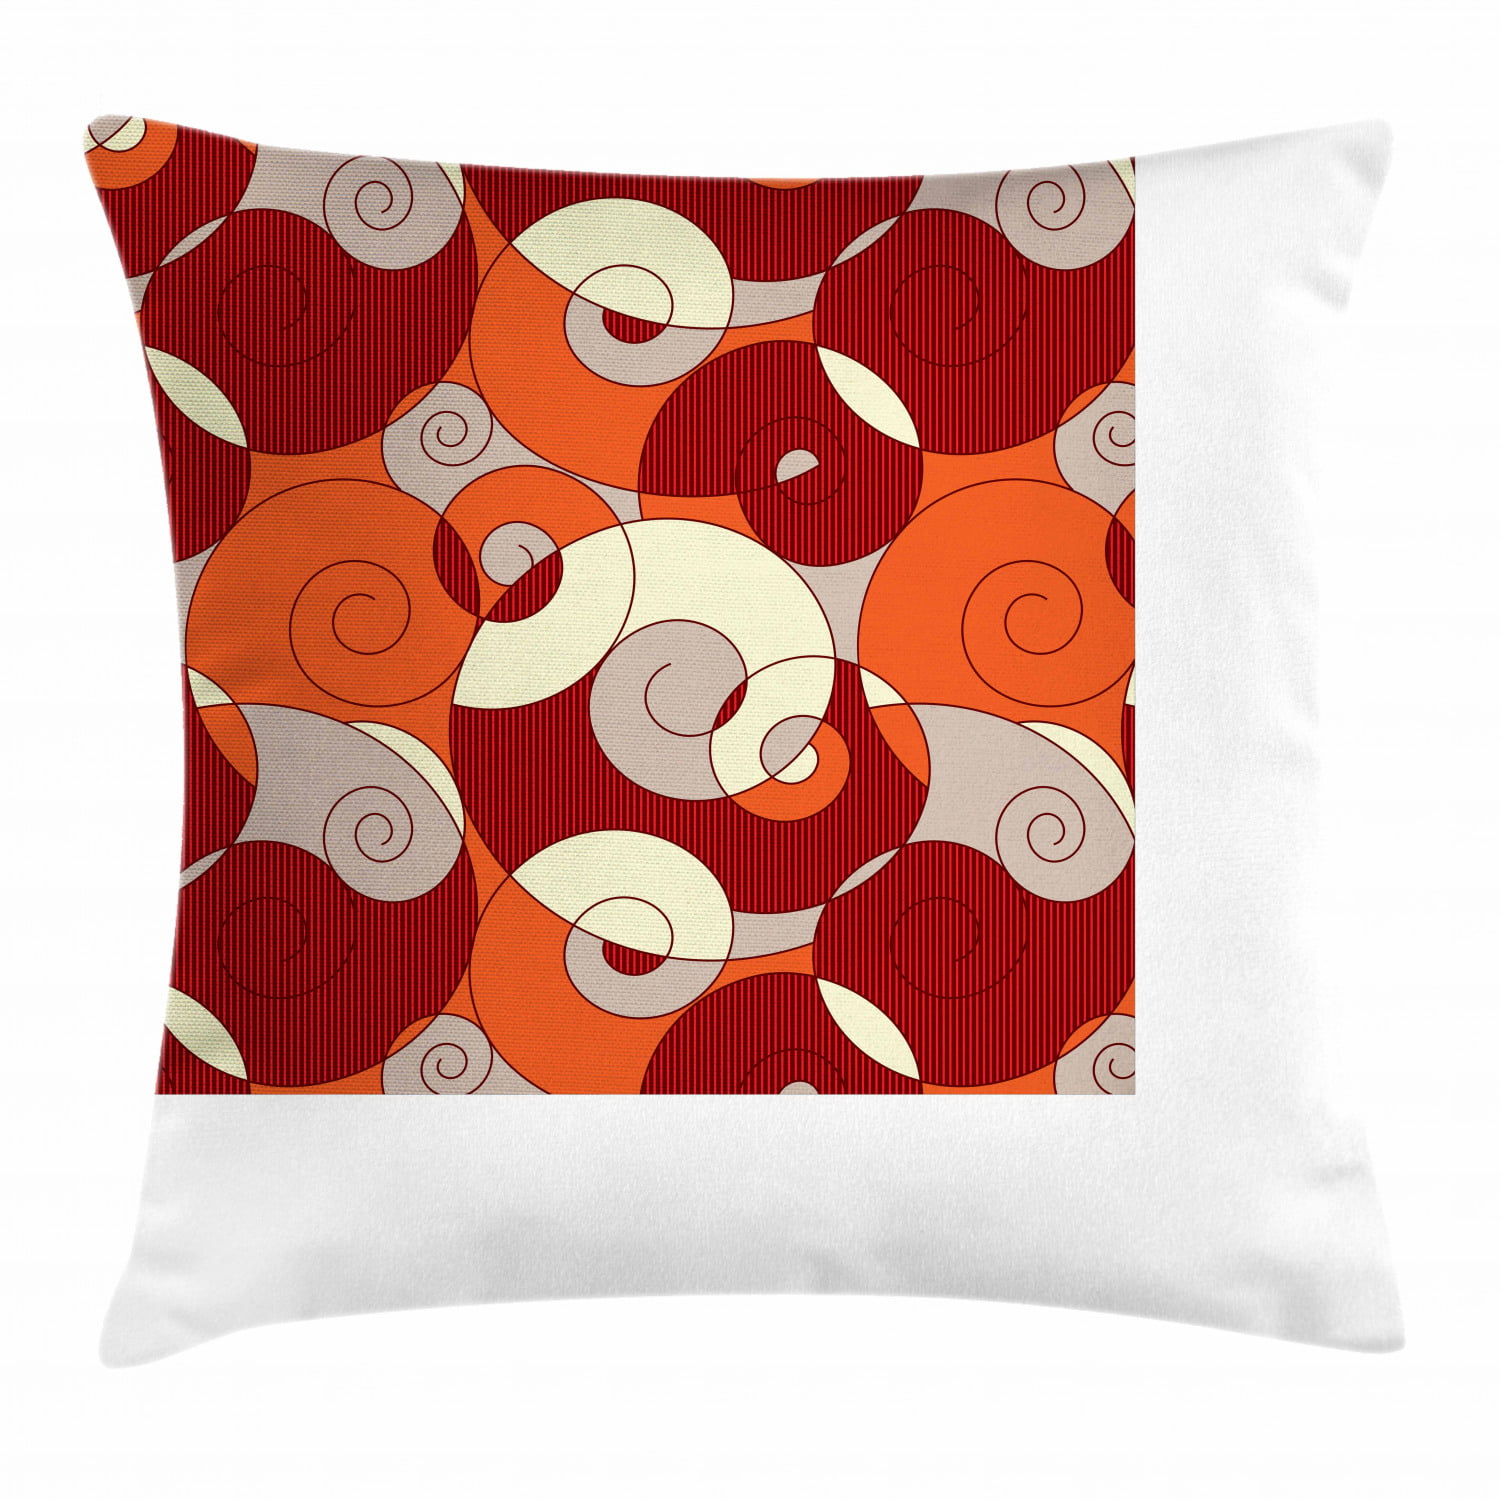 Geometric Abstract Lines Colorful Art Gift Colorful Art Modern Line Pattern Coral Abstract Throw Pillow Multicolor 16x16